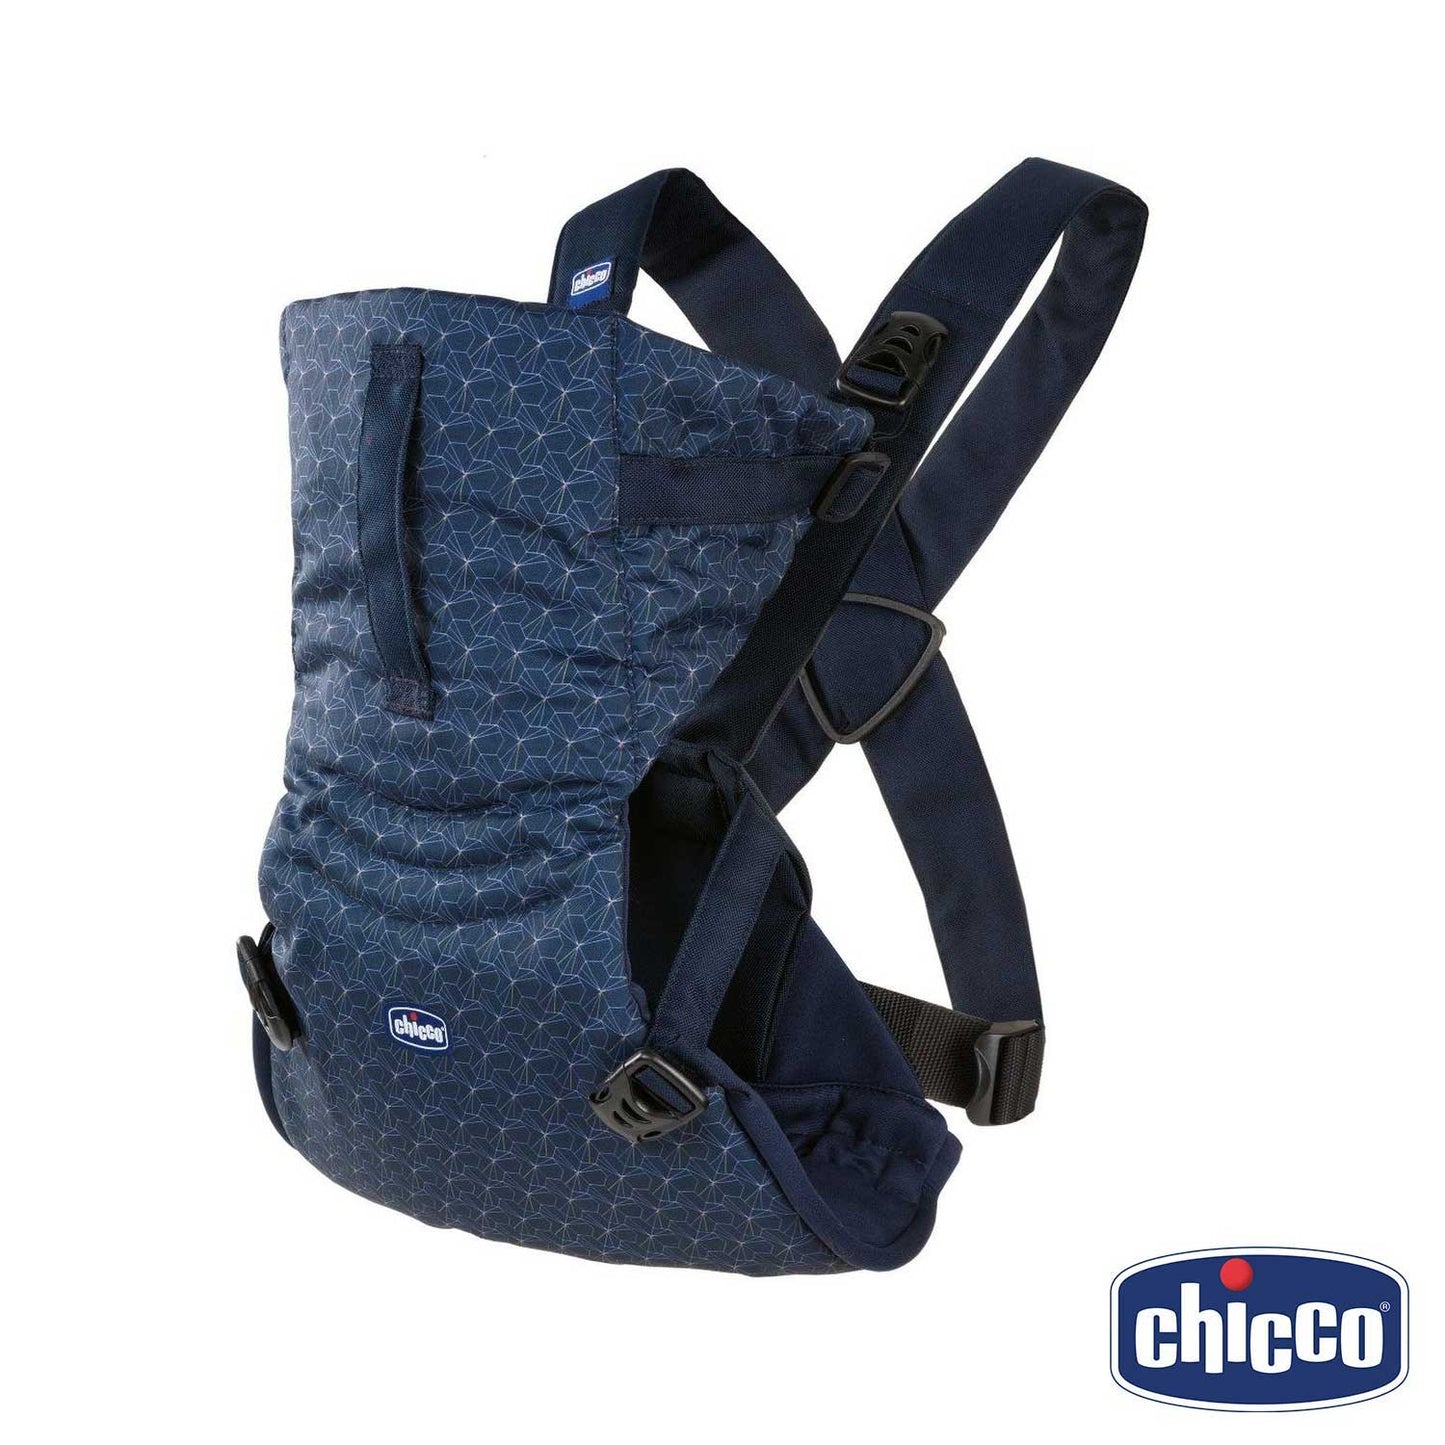 Chicco - Easy Fit Ergonomic Baby Carrier